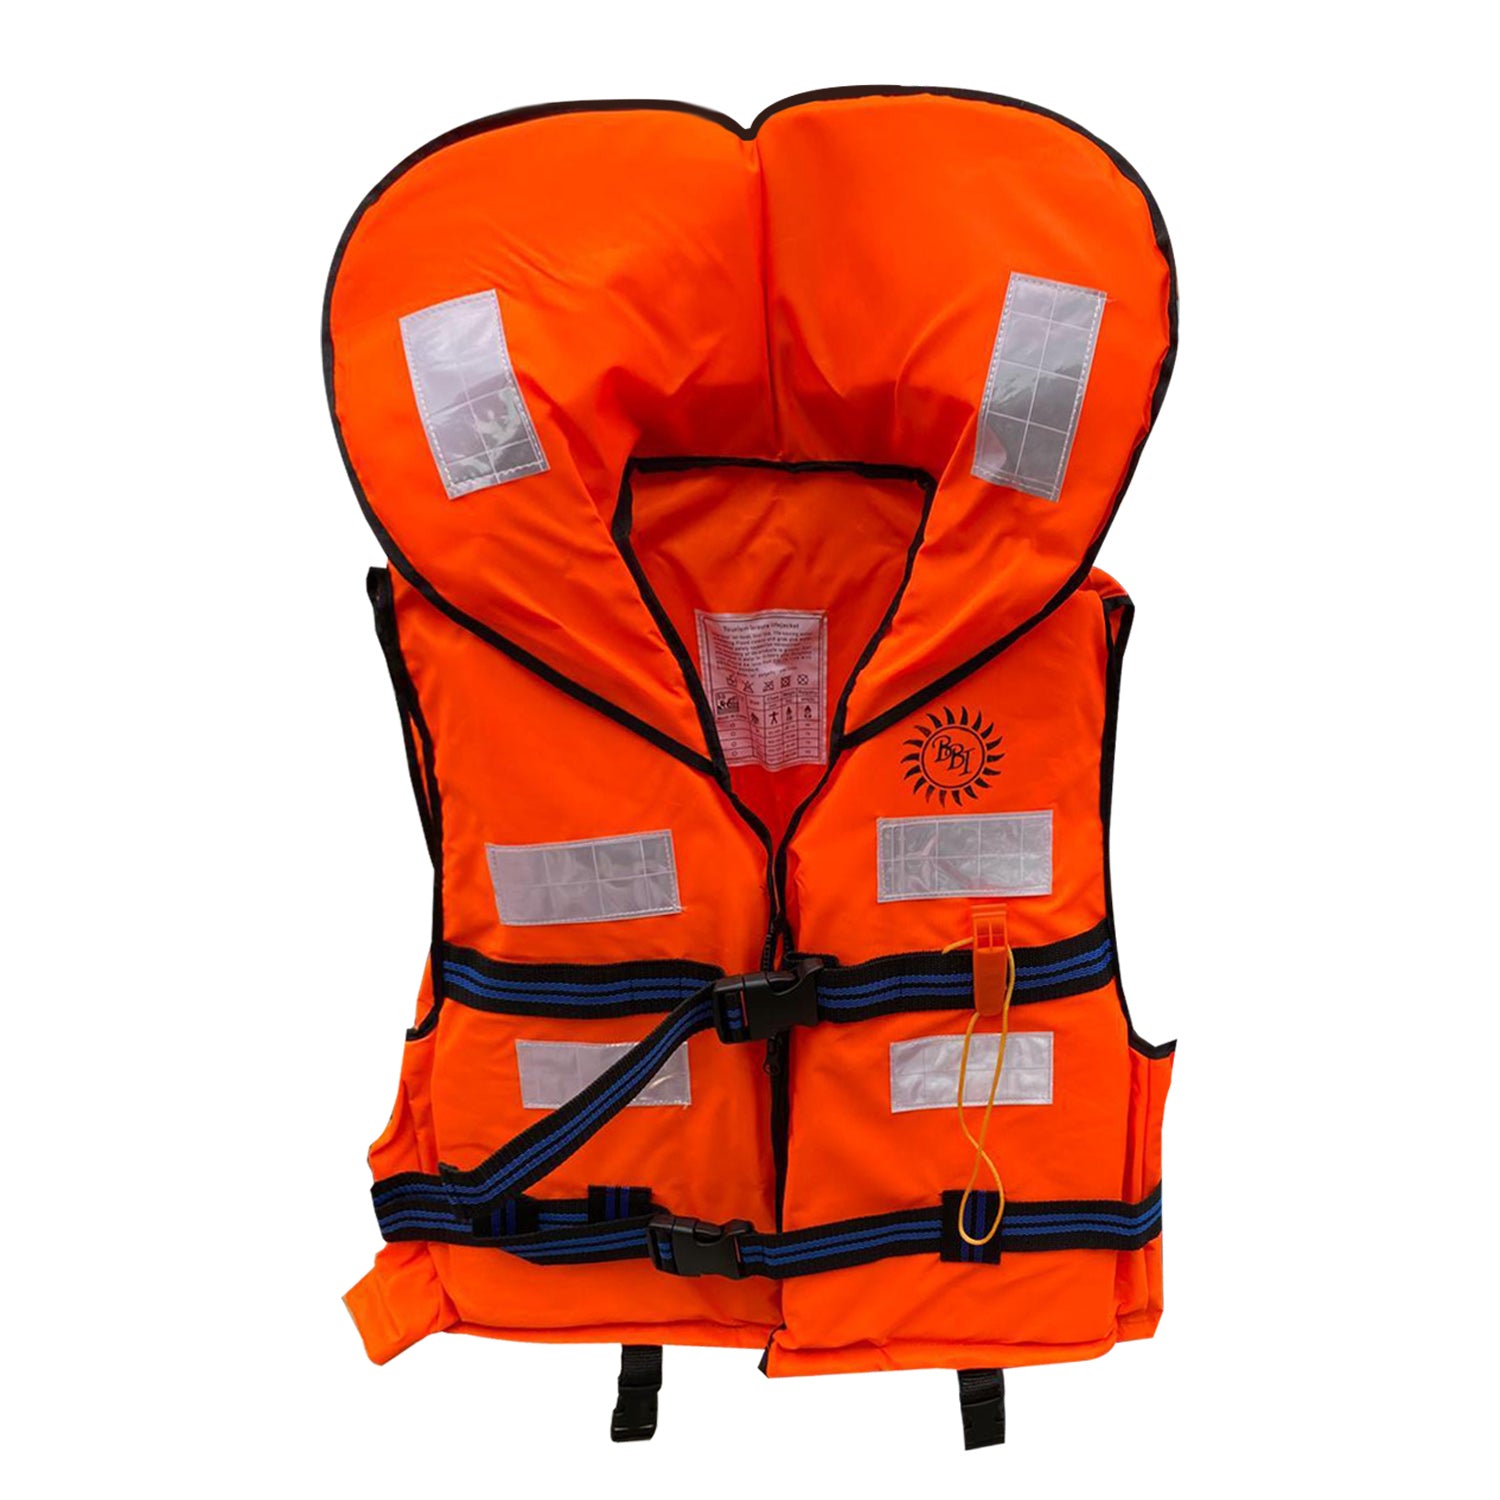 Buy Life Jacket for Swimming, Boating, Floating Online at Best Prices ...